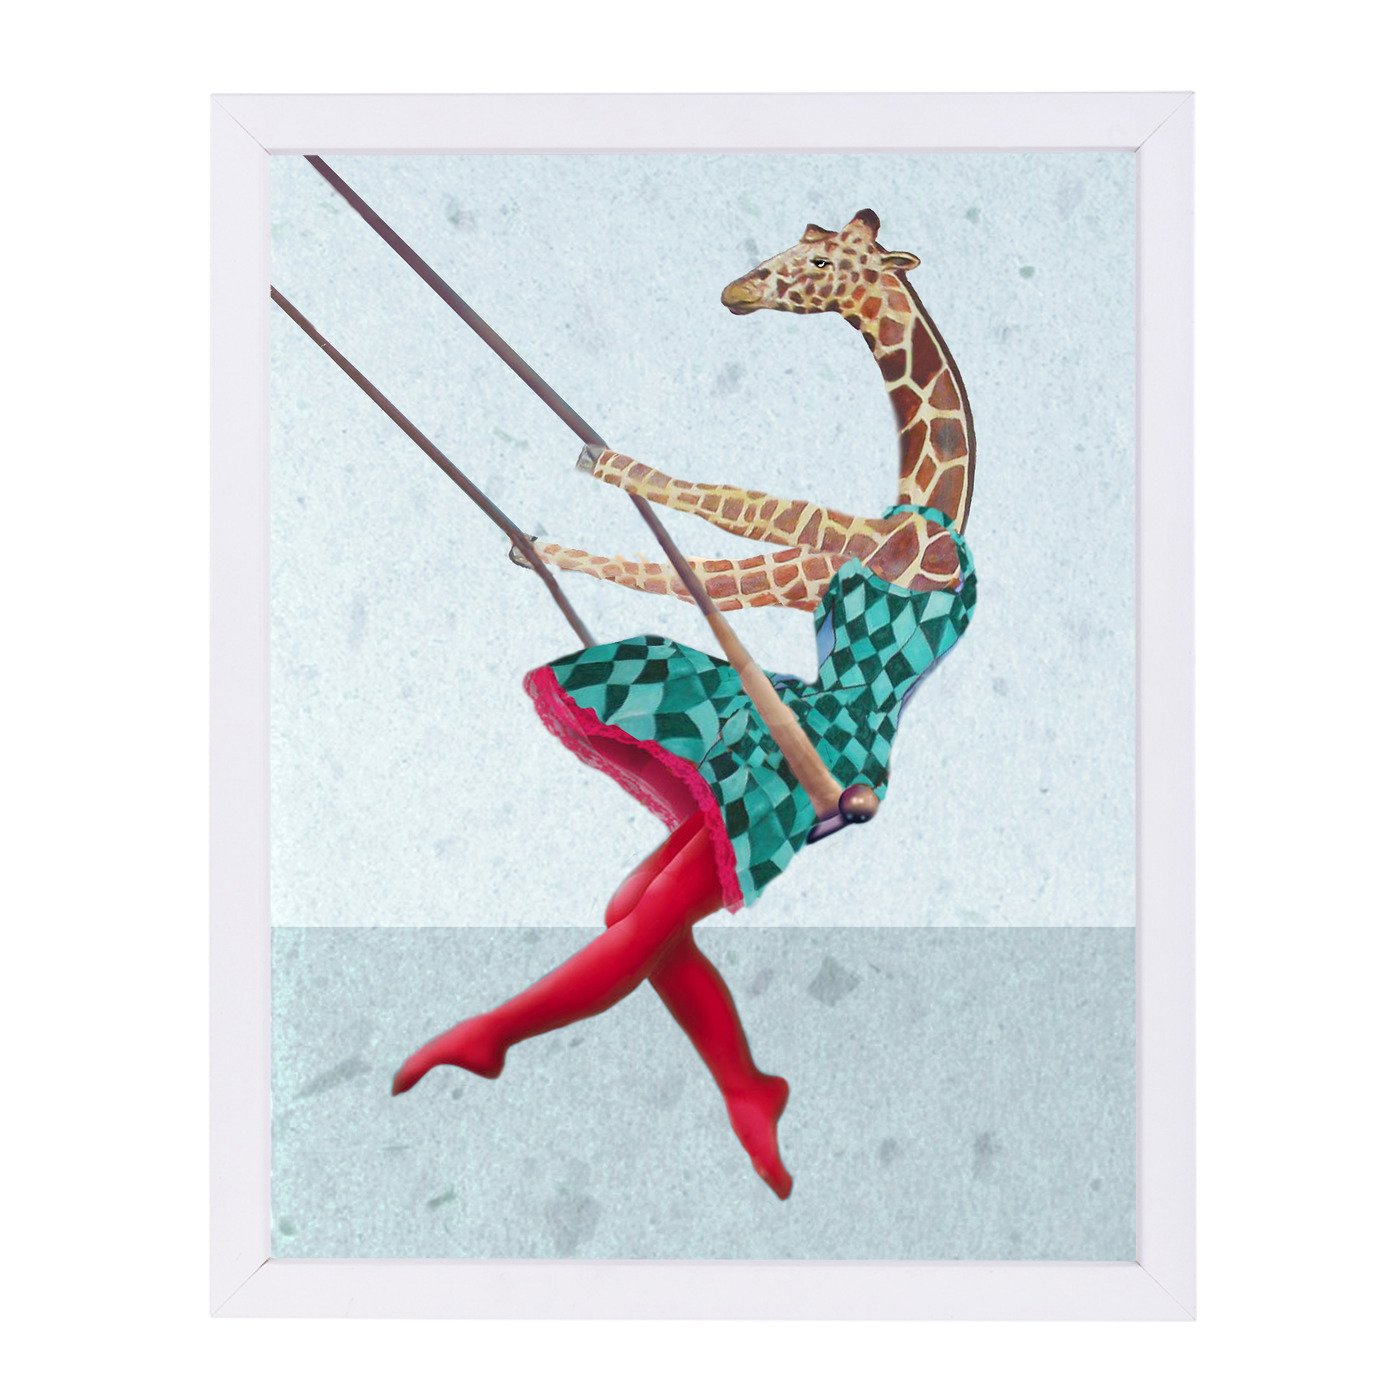 Giraffe On A Swing Right By Coco De Paris - Framed Print - Americanflat